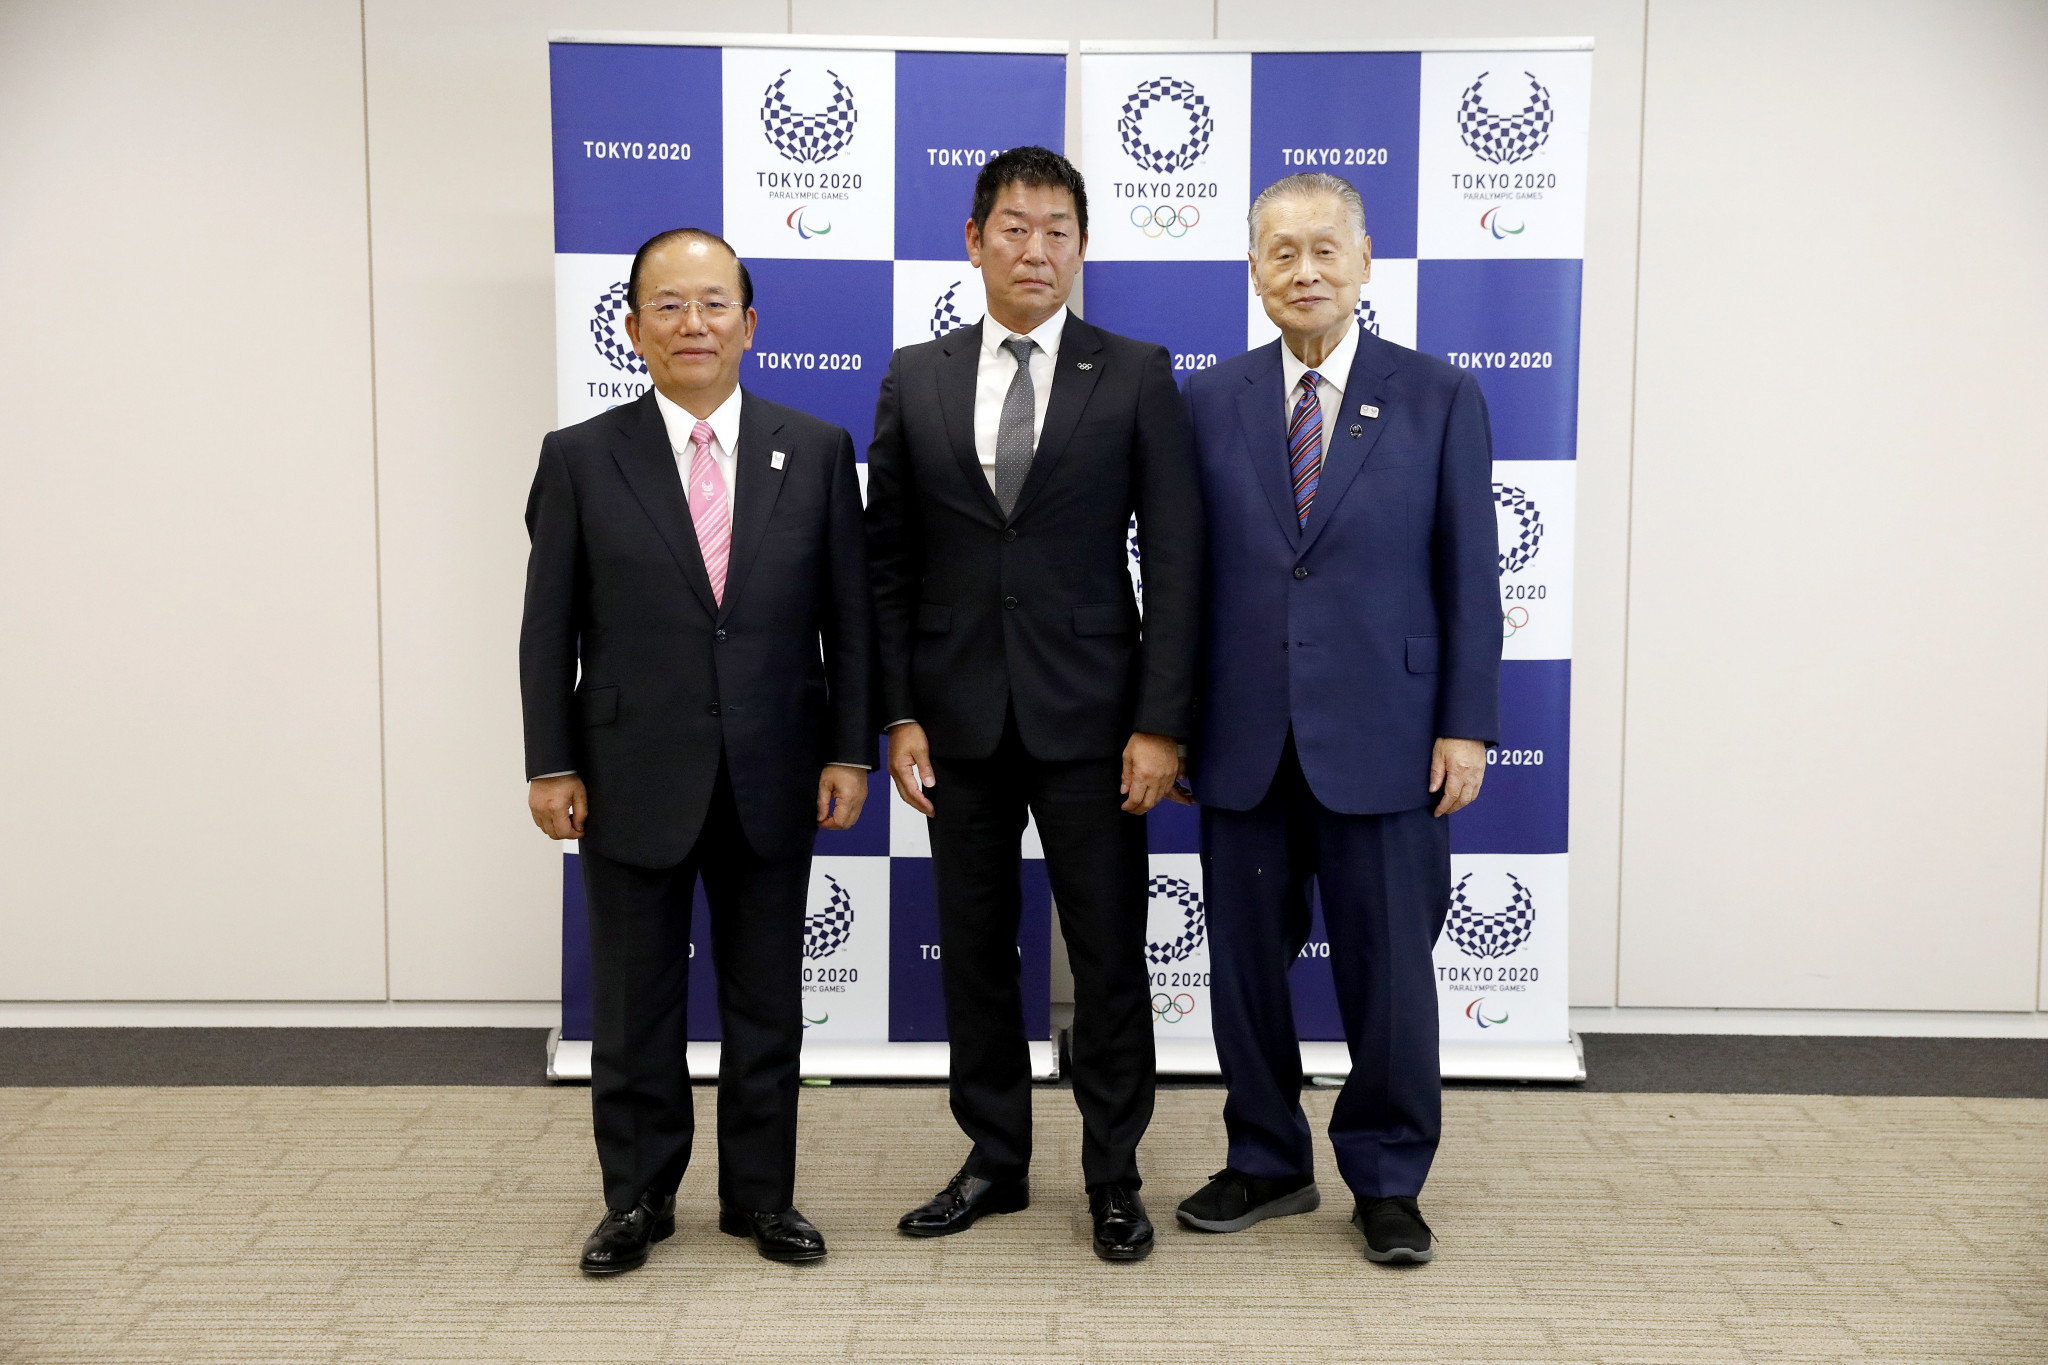 Morinari Watanabe, centre, has met with Tokyo 2020 President Yoshirō Mori, right, and chief executive Toshirō Mutō, left, after returning from Buenos Aires where he was elected an IOC member ©Tokyo 2020